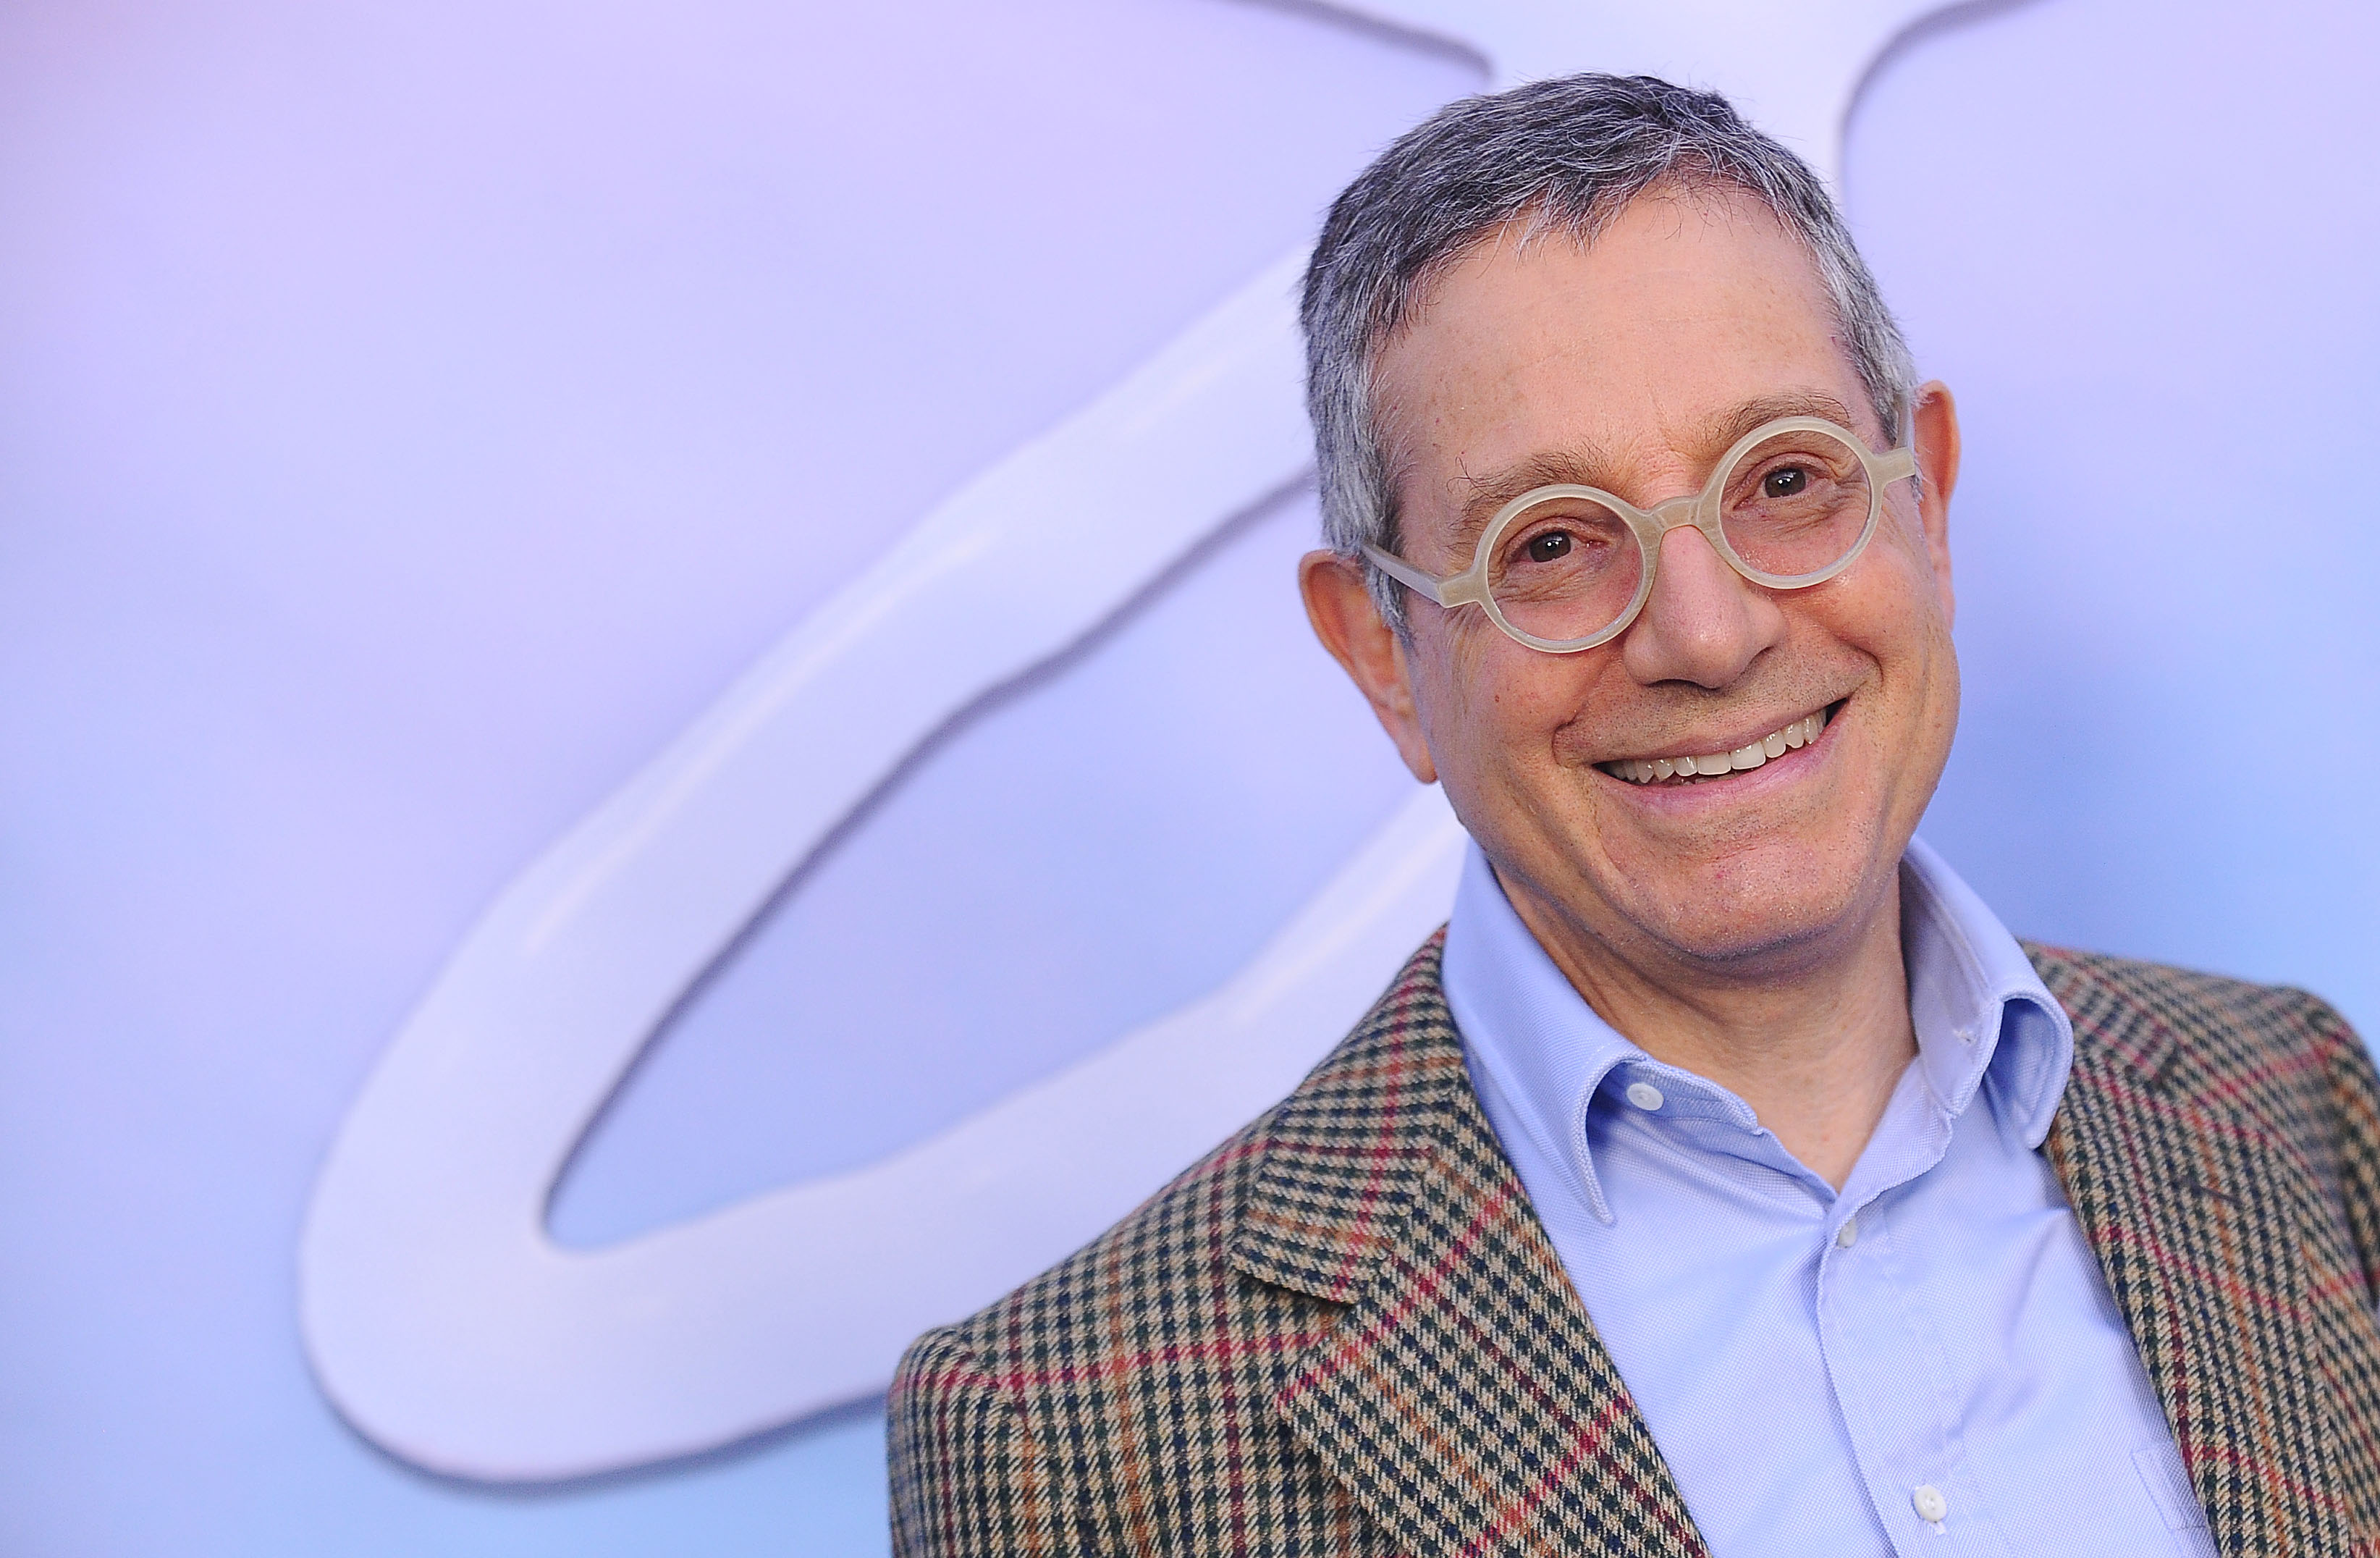 Art Dealer Jeffrey Deitch on How He Keeps Keyed In to the Zeitgeist After 27 Years in Business